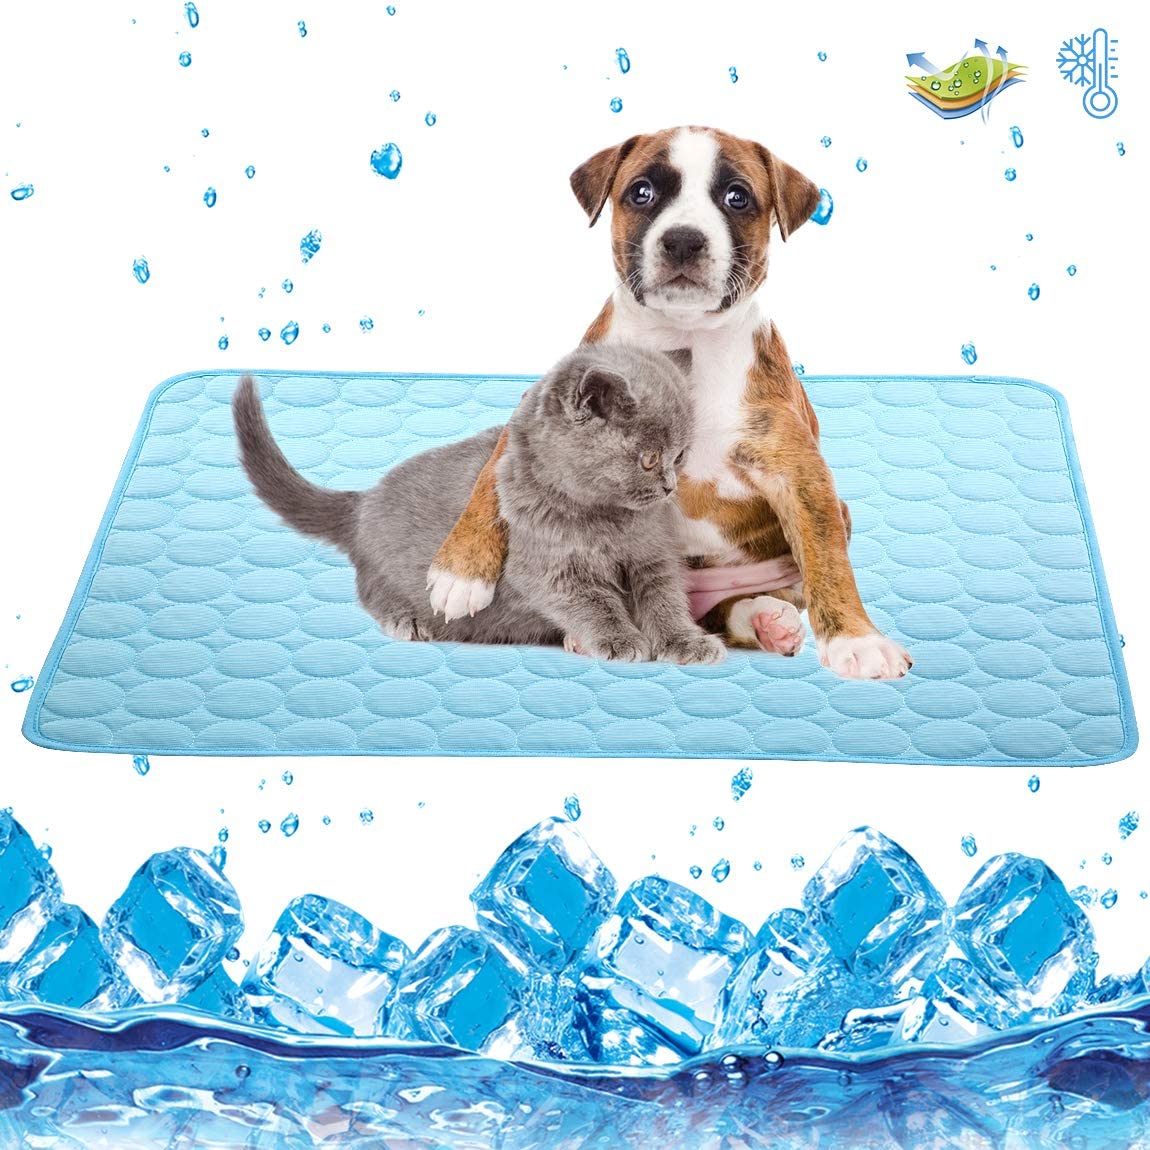 KUTKUT Pet Cooling Mats Washable, Reusable & Breathable Ice Silk Pet Self Cooling Blanket | Non-Toxic Pet Sleeping Pad Blanket for Pet Beds Kennels Couches Sofa Floors Car Seats-kutkutstyle